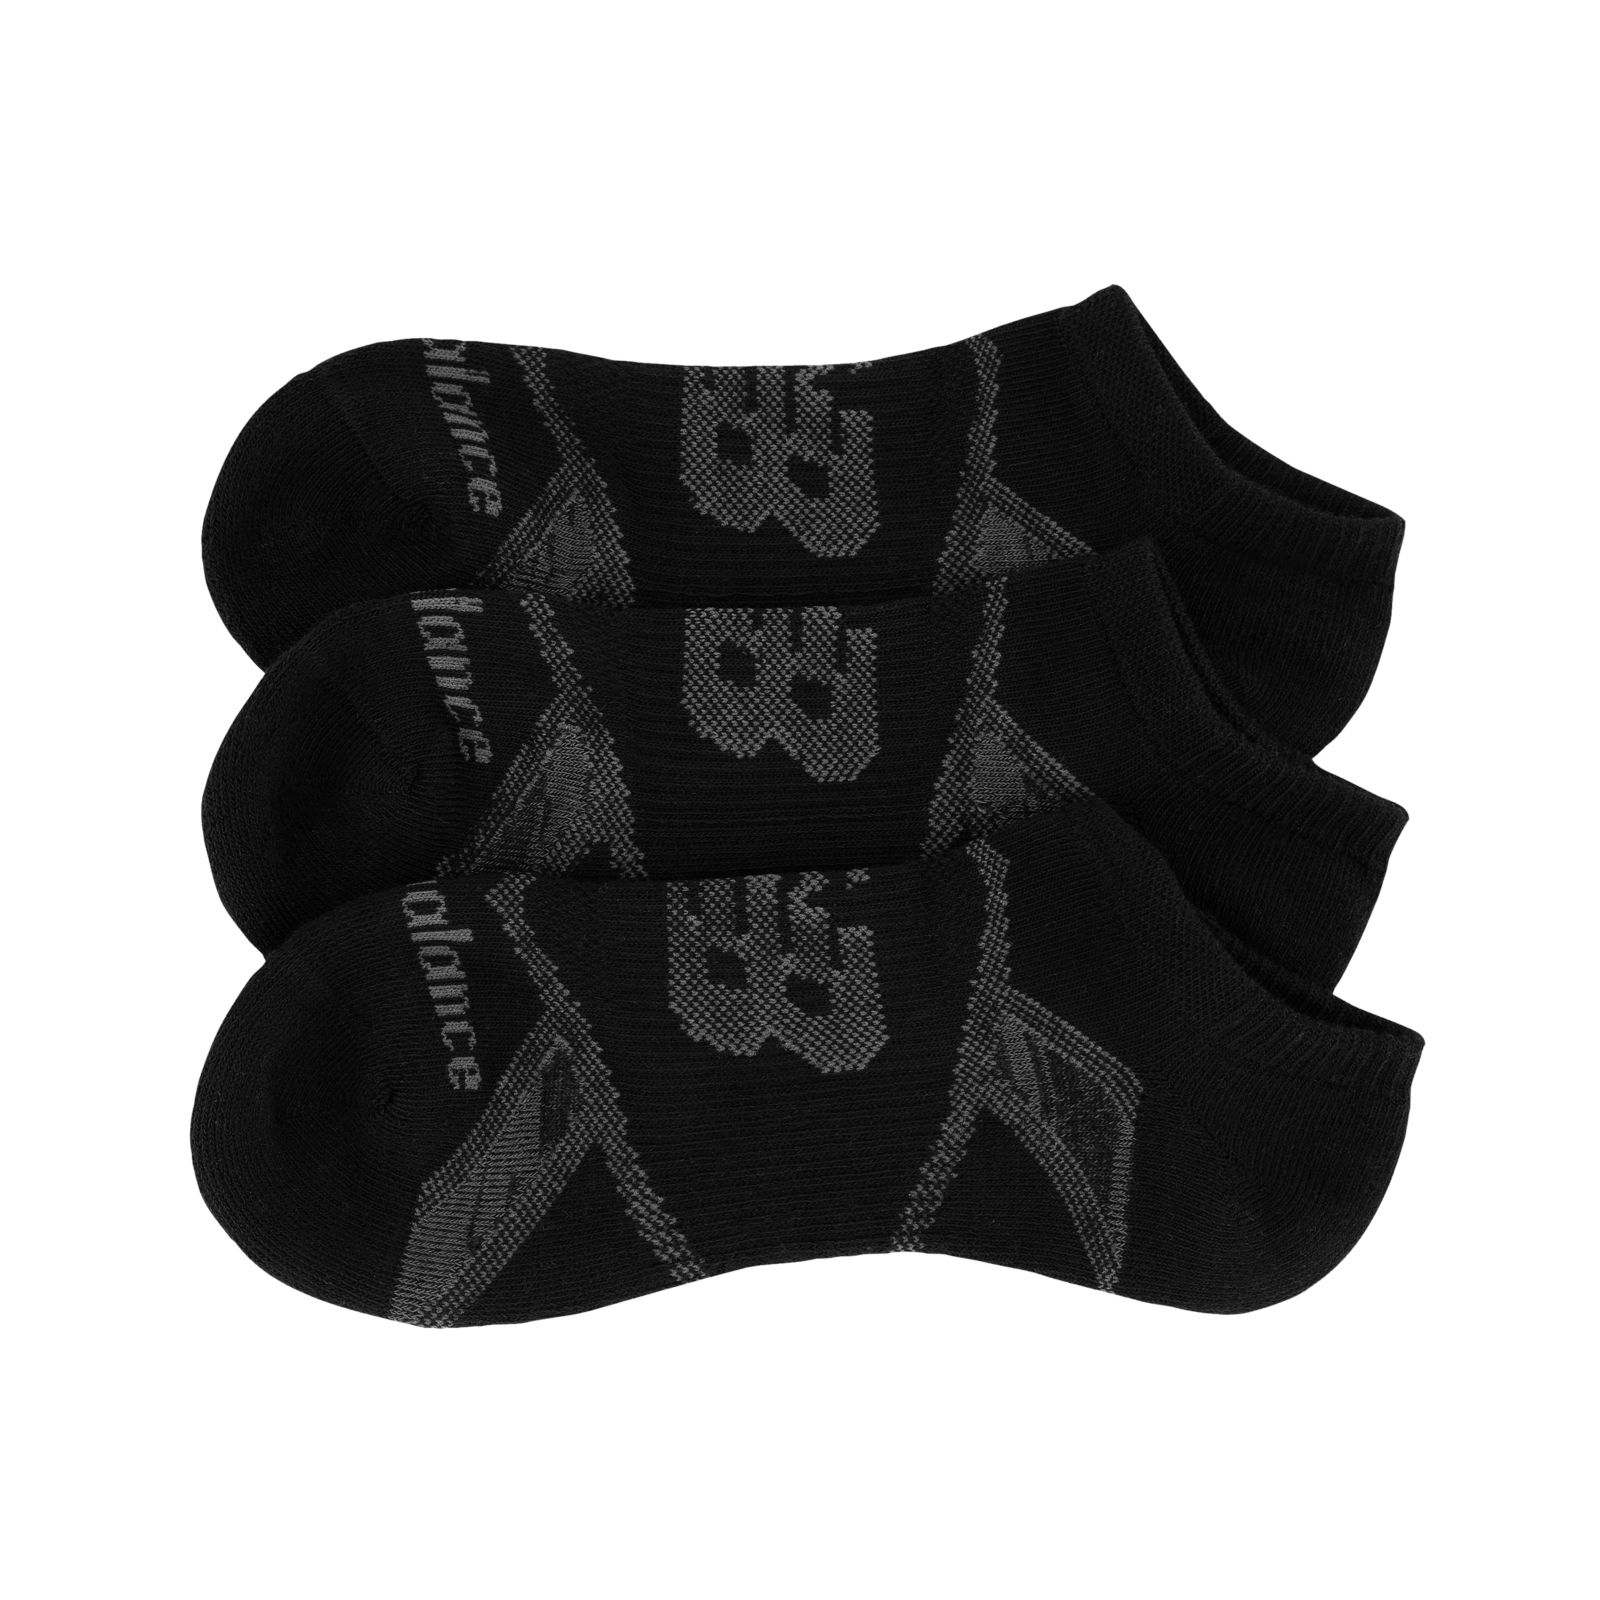 3-pack of no-show sports socks